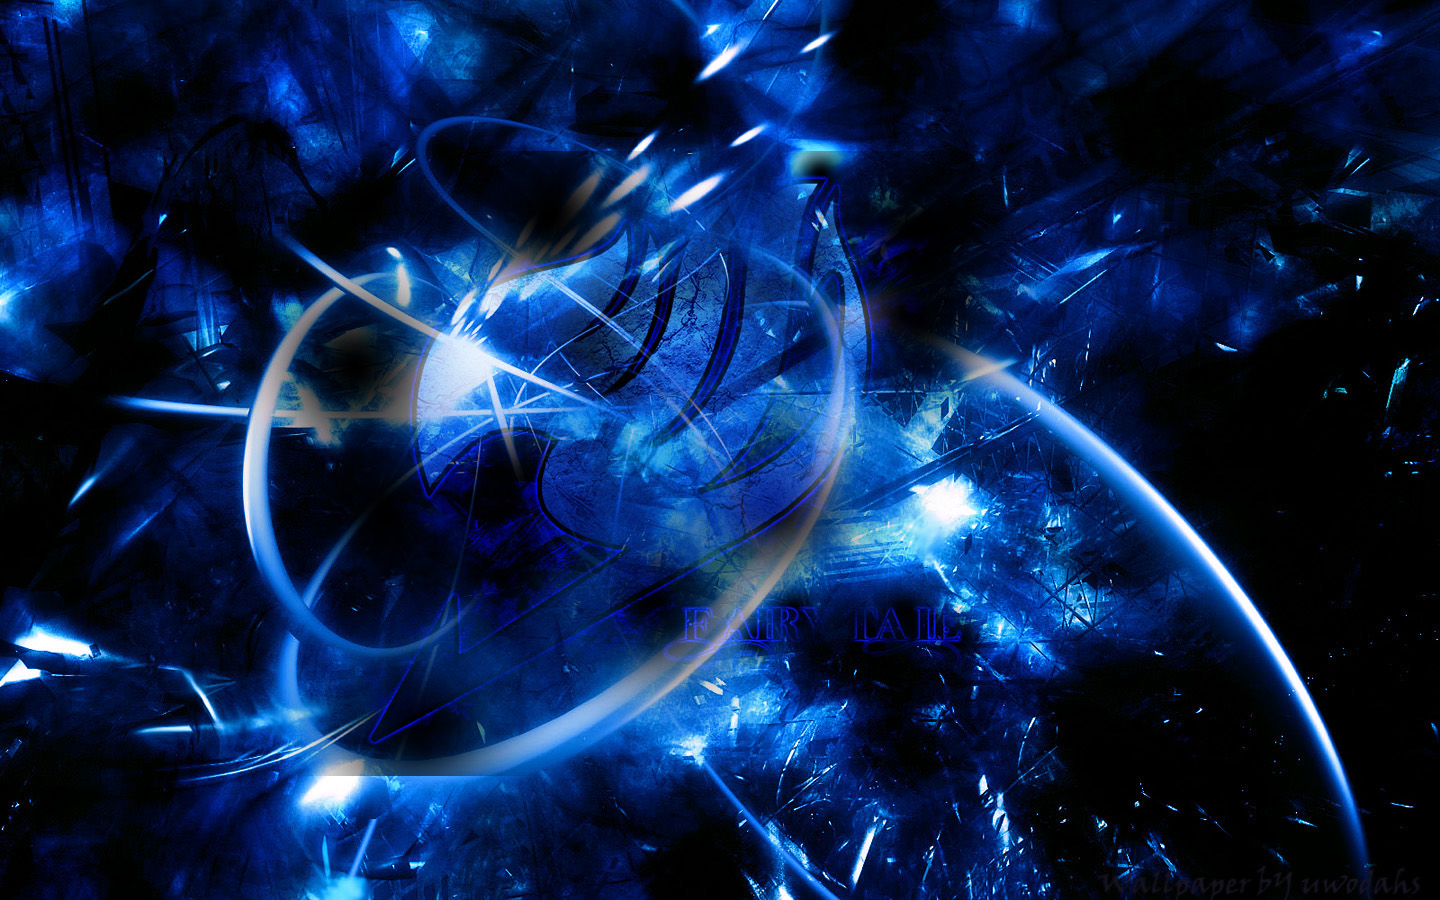 Free Download Blue Fairy Tail Hd Wallpaper In Abstract 1440x900 For Your Desktop Mobile Tablet Explore 49 Fairy Tail Logo Desktop Wallpaper Fairy Tail Wallpaper Free Fairy Wallpaper